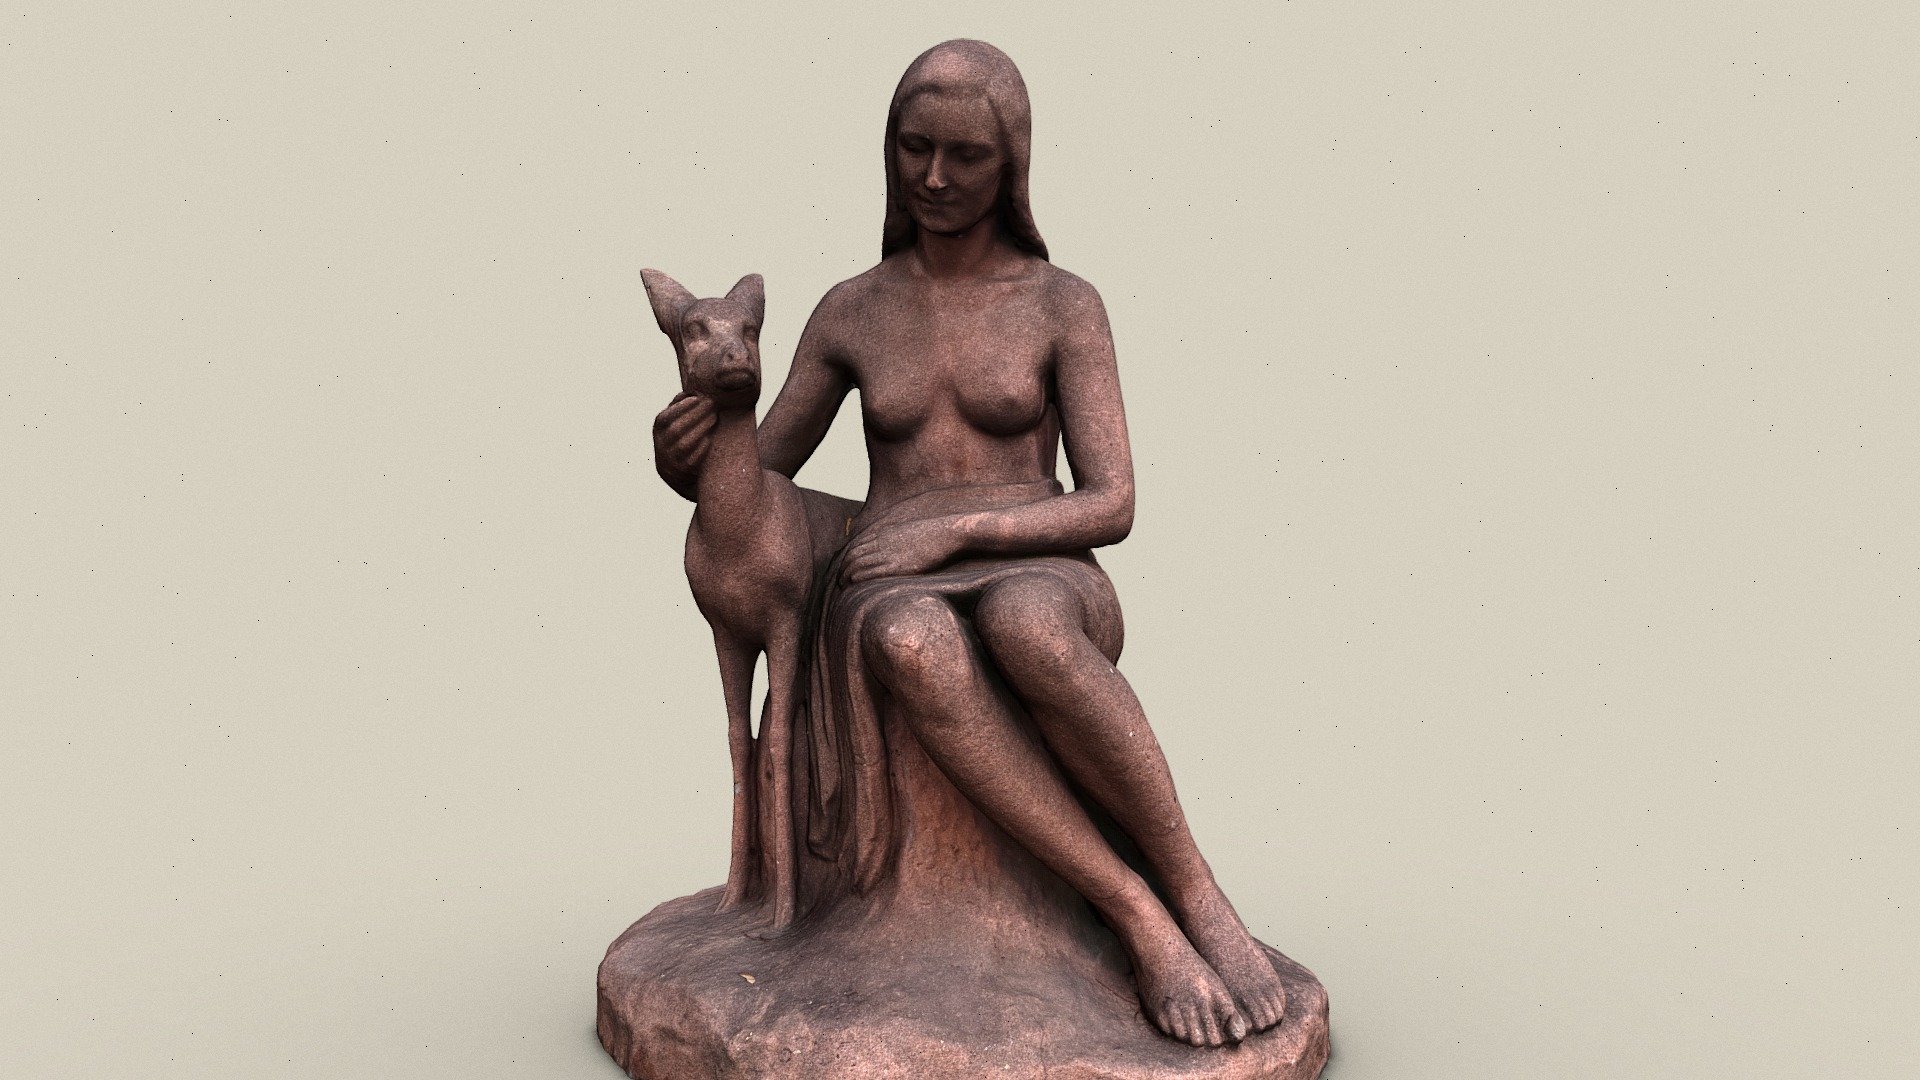 Fountain figure depicting the Brothers Grimm fairy tale &ldquo;Brother and Sister